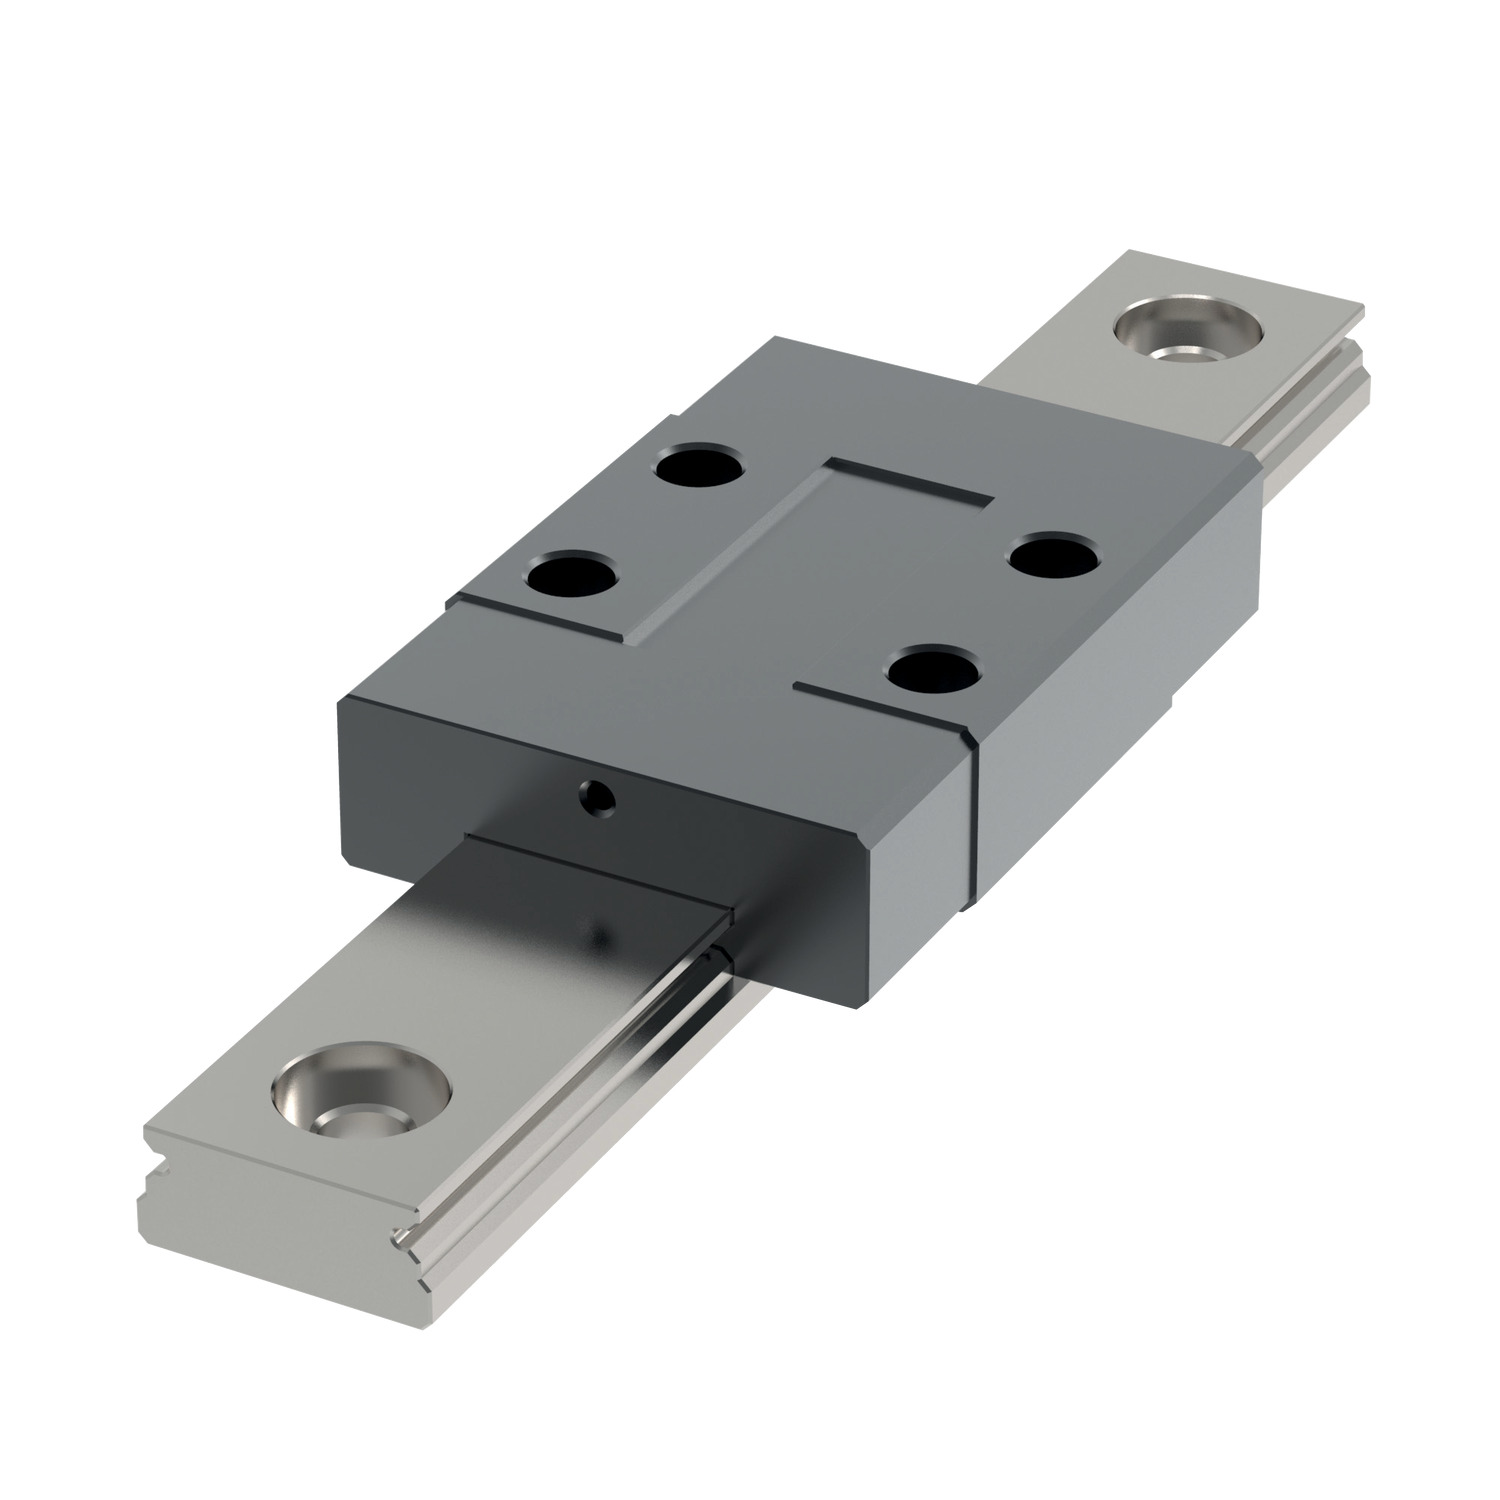 Miniature Linear Guideways We also stock a wide range of hardened stainless steel linear rails for applications in which space may be at a premium. Available in width sizes 5, 7, 9, 12, 15mm. Carriages (L1010.C) and clamps (L1010.CL) are also in stock.